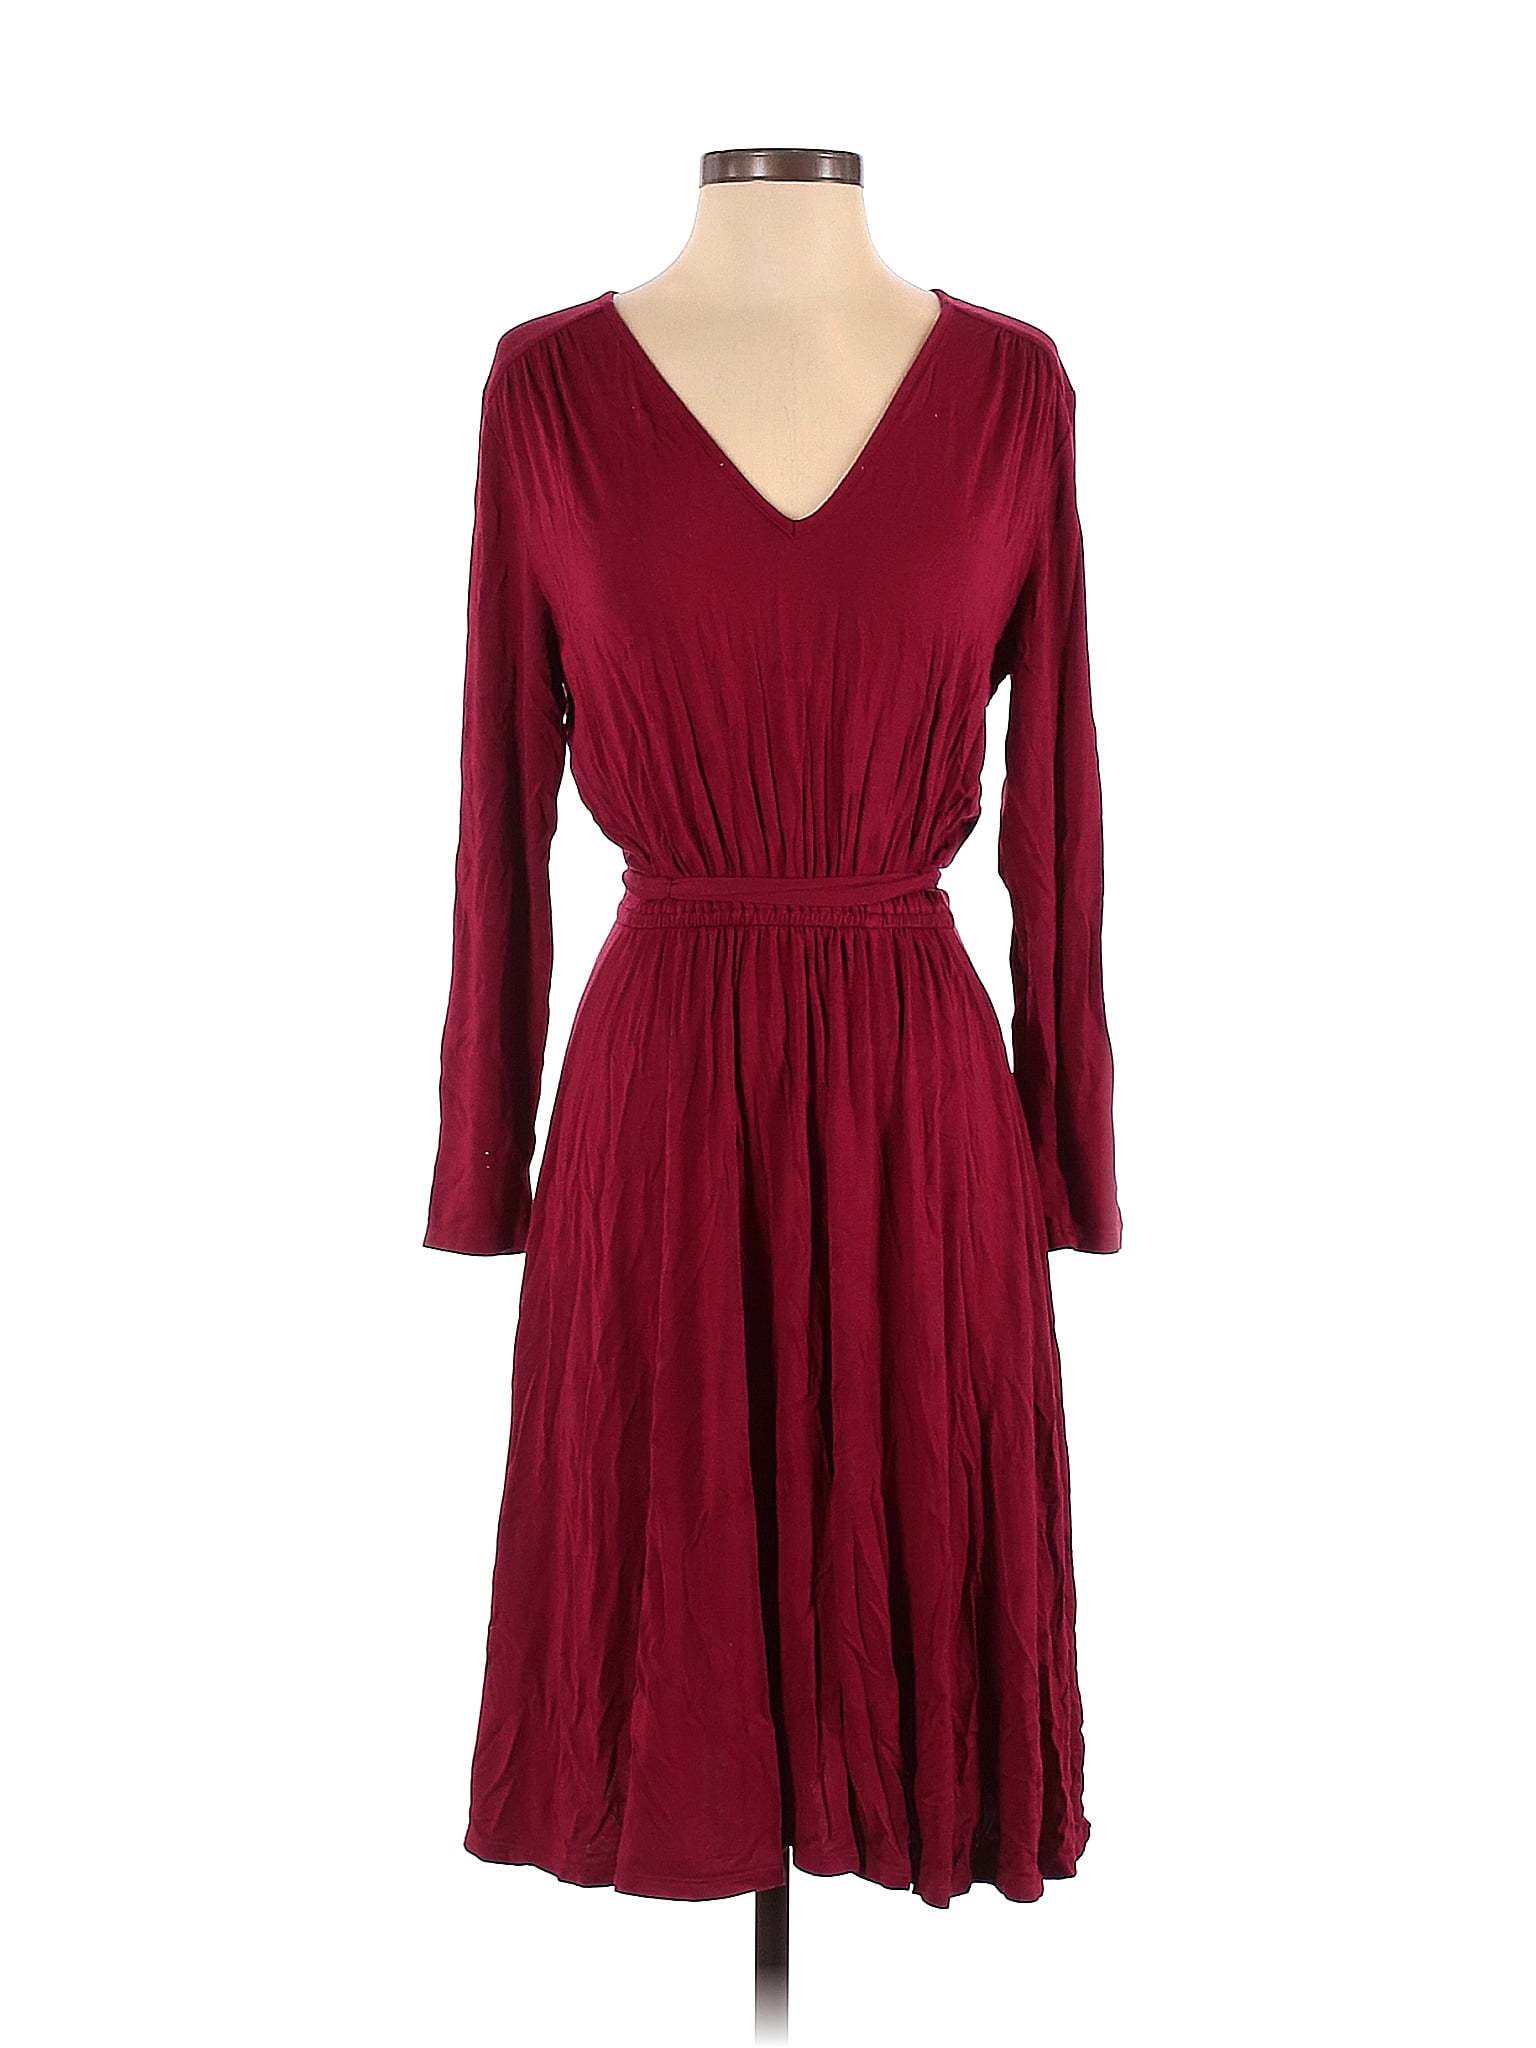 Amour Vert Solid Maroon Red Casual Dress Size S - 68% off | thredUP